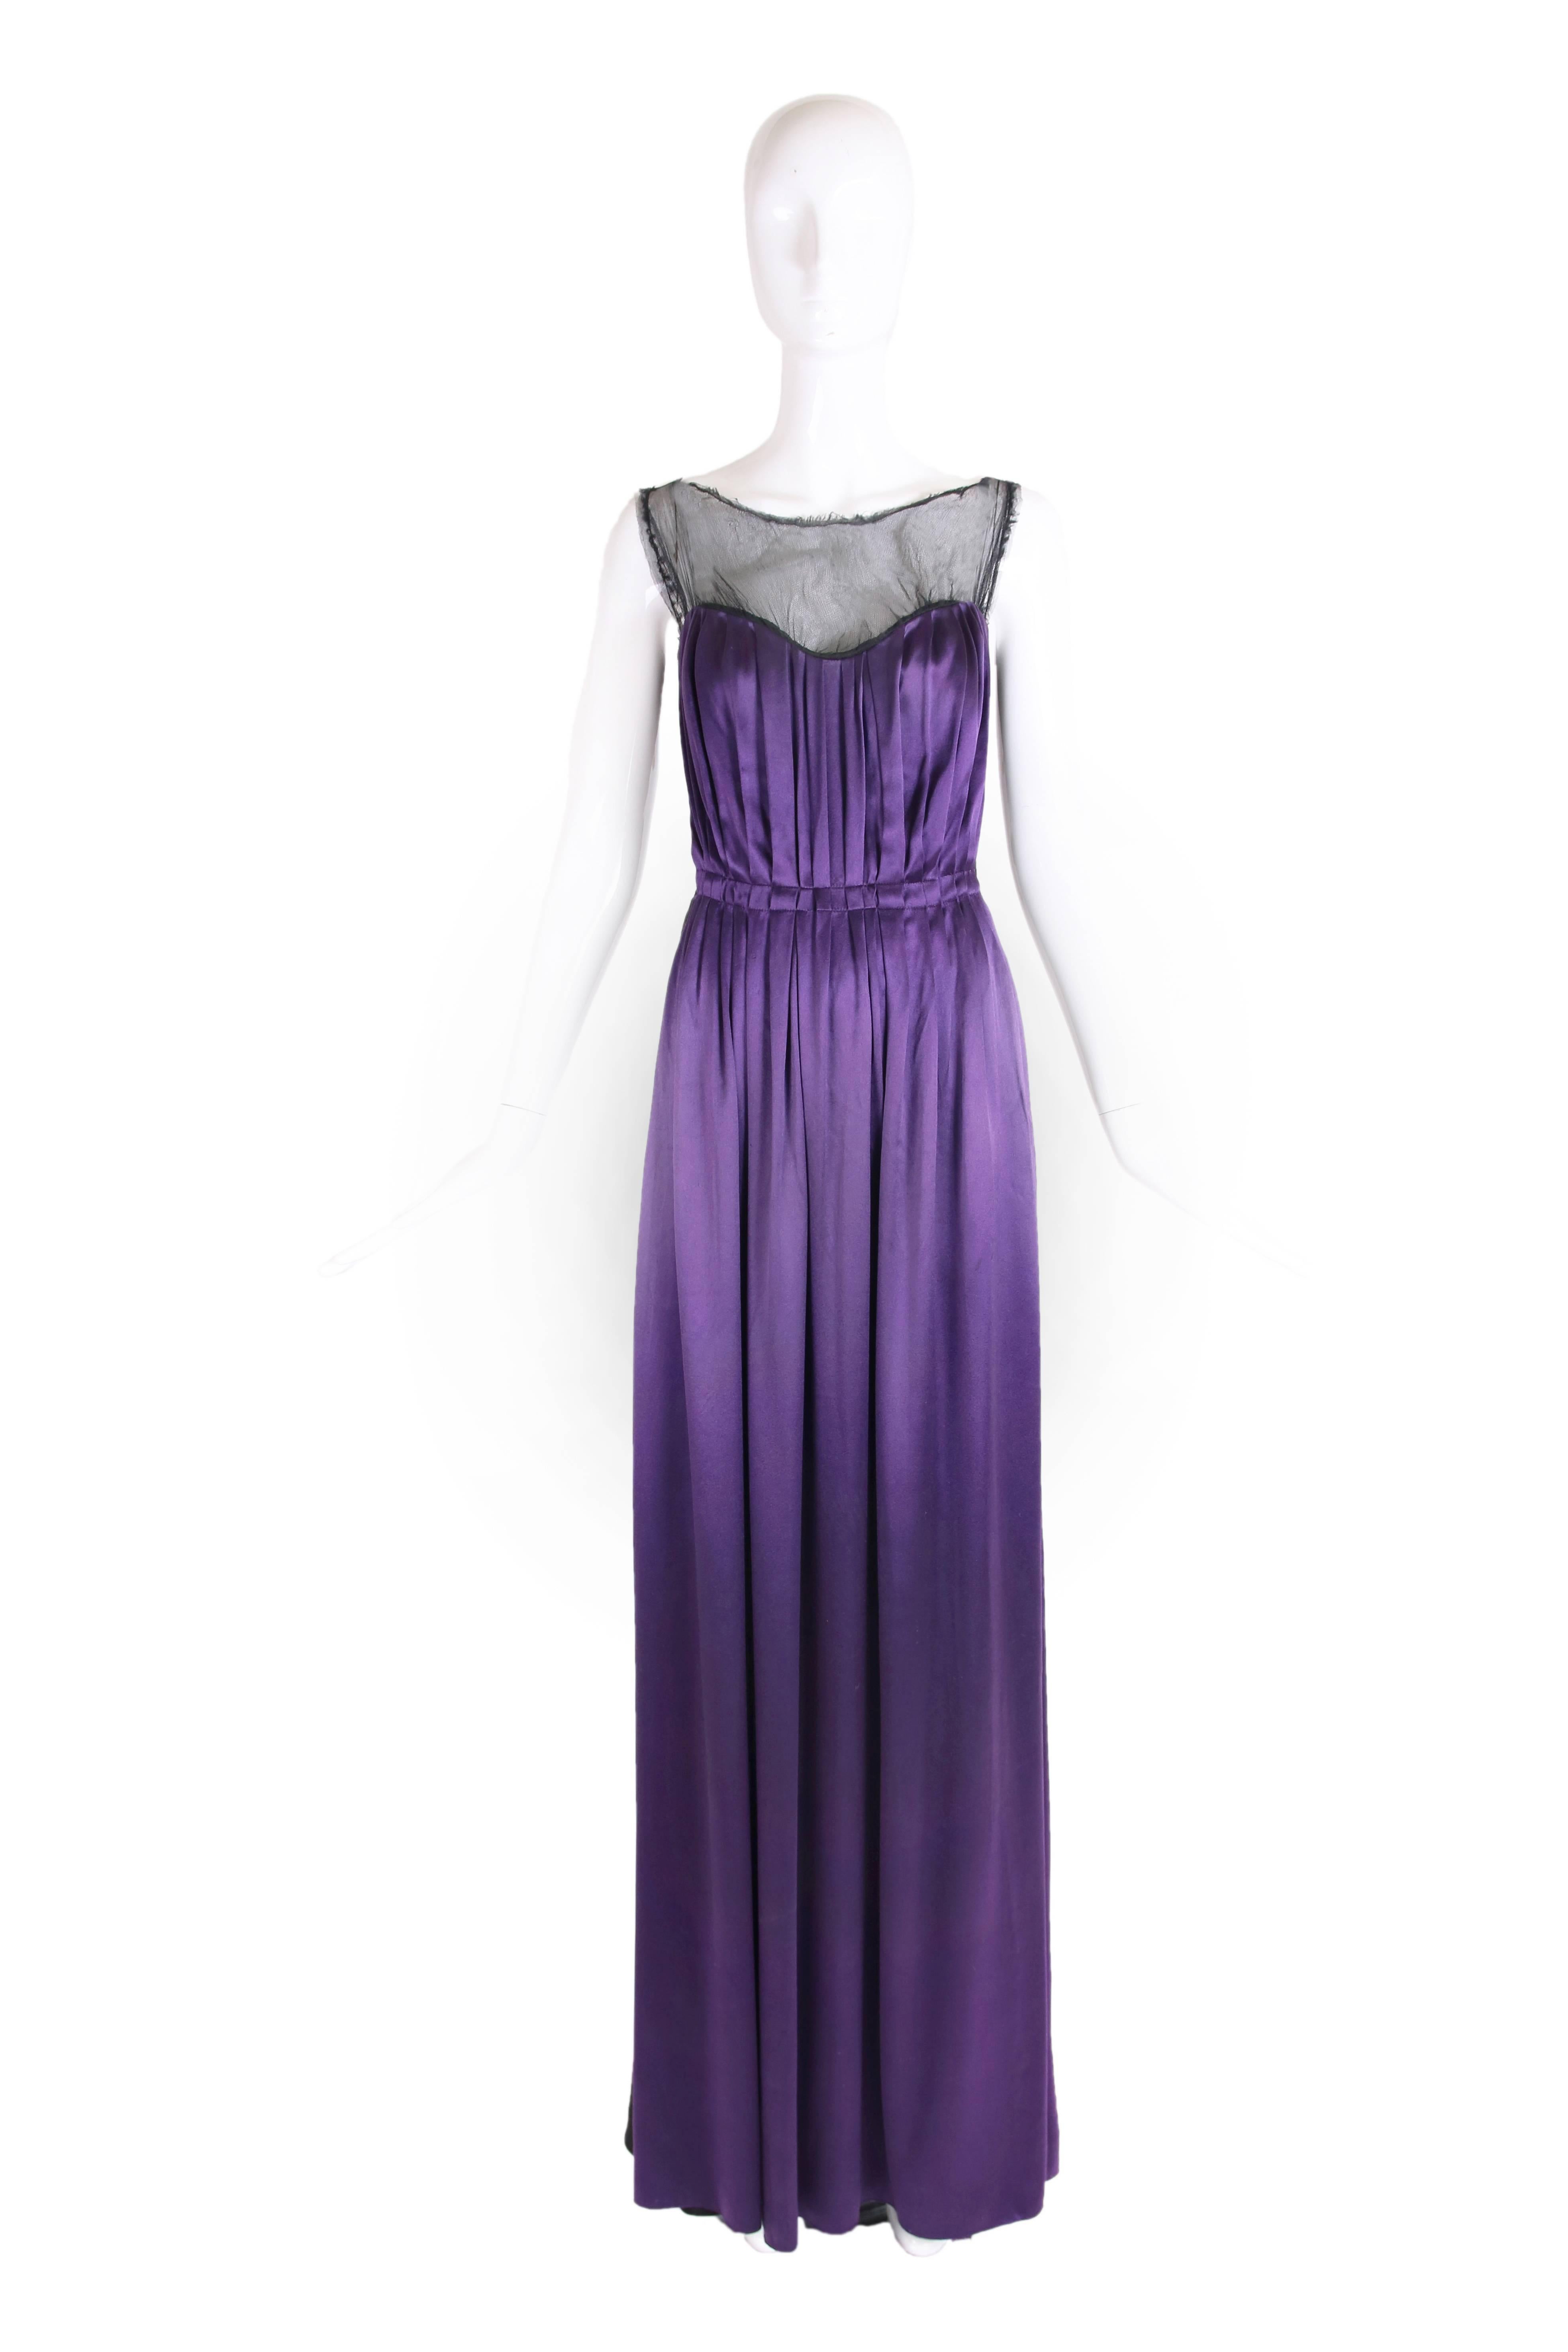 2006 Lanvin dramatic evening gown made of wool, satin and sheer silk tulle. Gown in constructed from pleated purple satin at the front, black stretch wool at the back and sheer black silk tulle at the interior that forms the gathered transparent